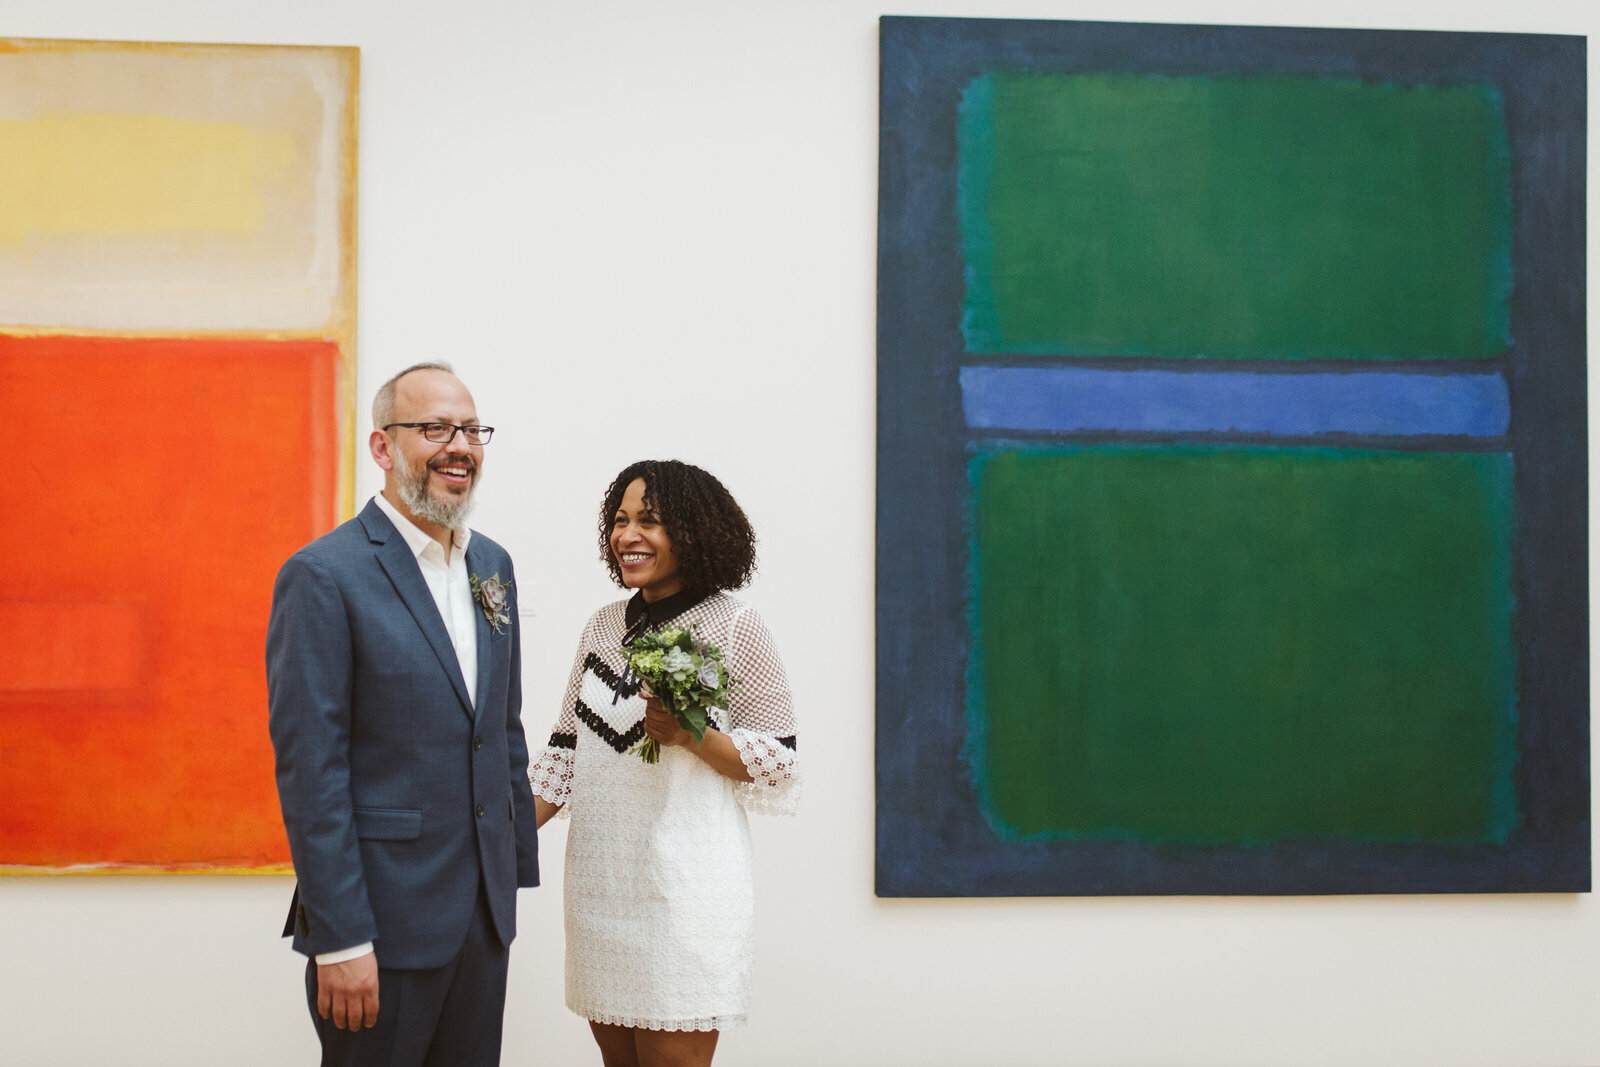 Washington DC Elopement Photographer Valerie Demo specializes in laid back , fun elopements for bold couples.